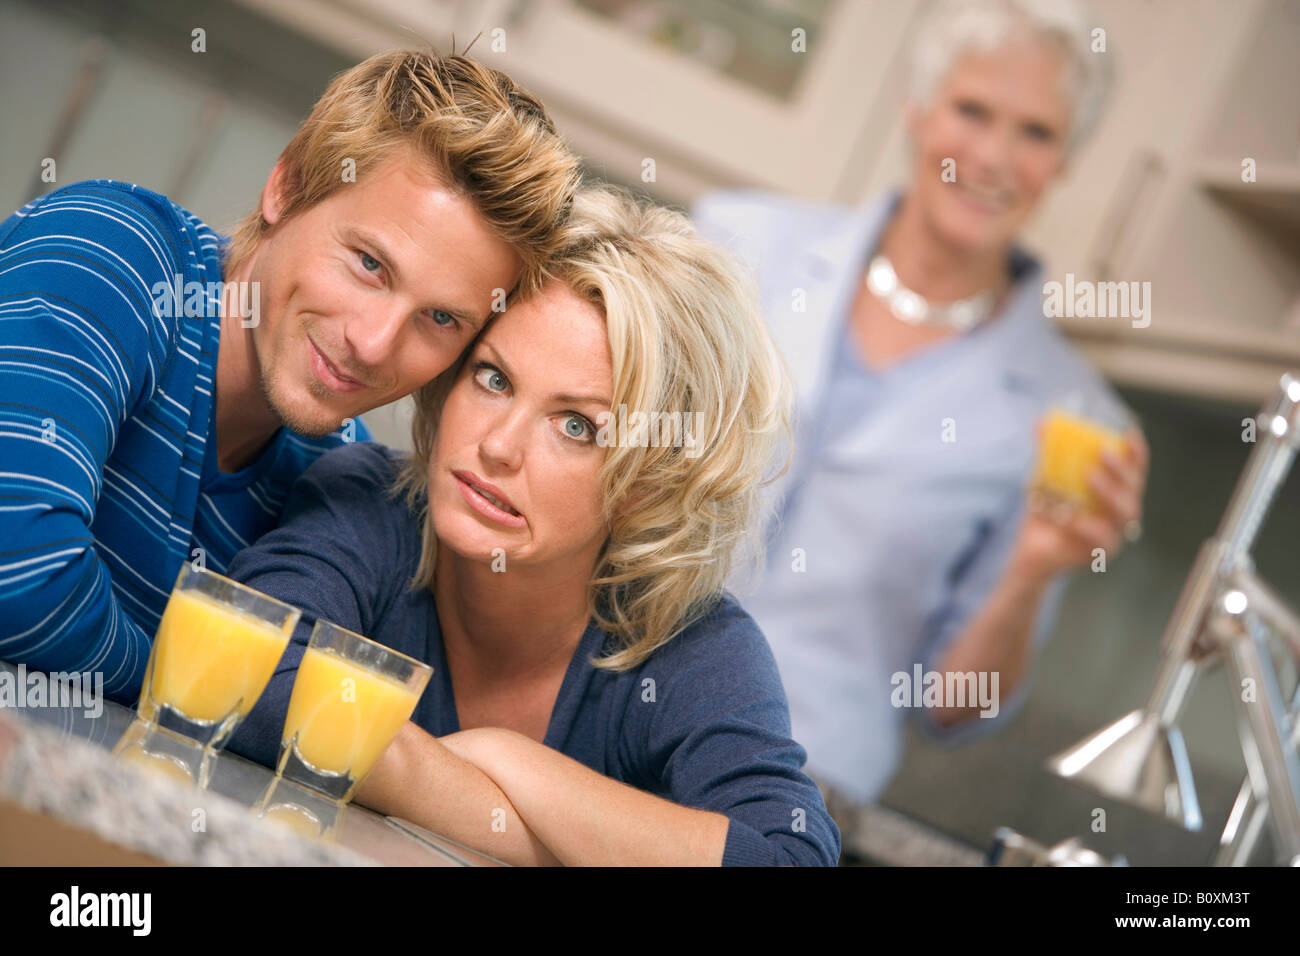 Young couple smiling Banque D'Images